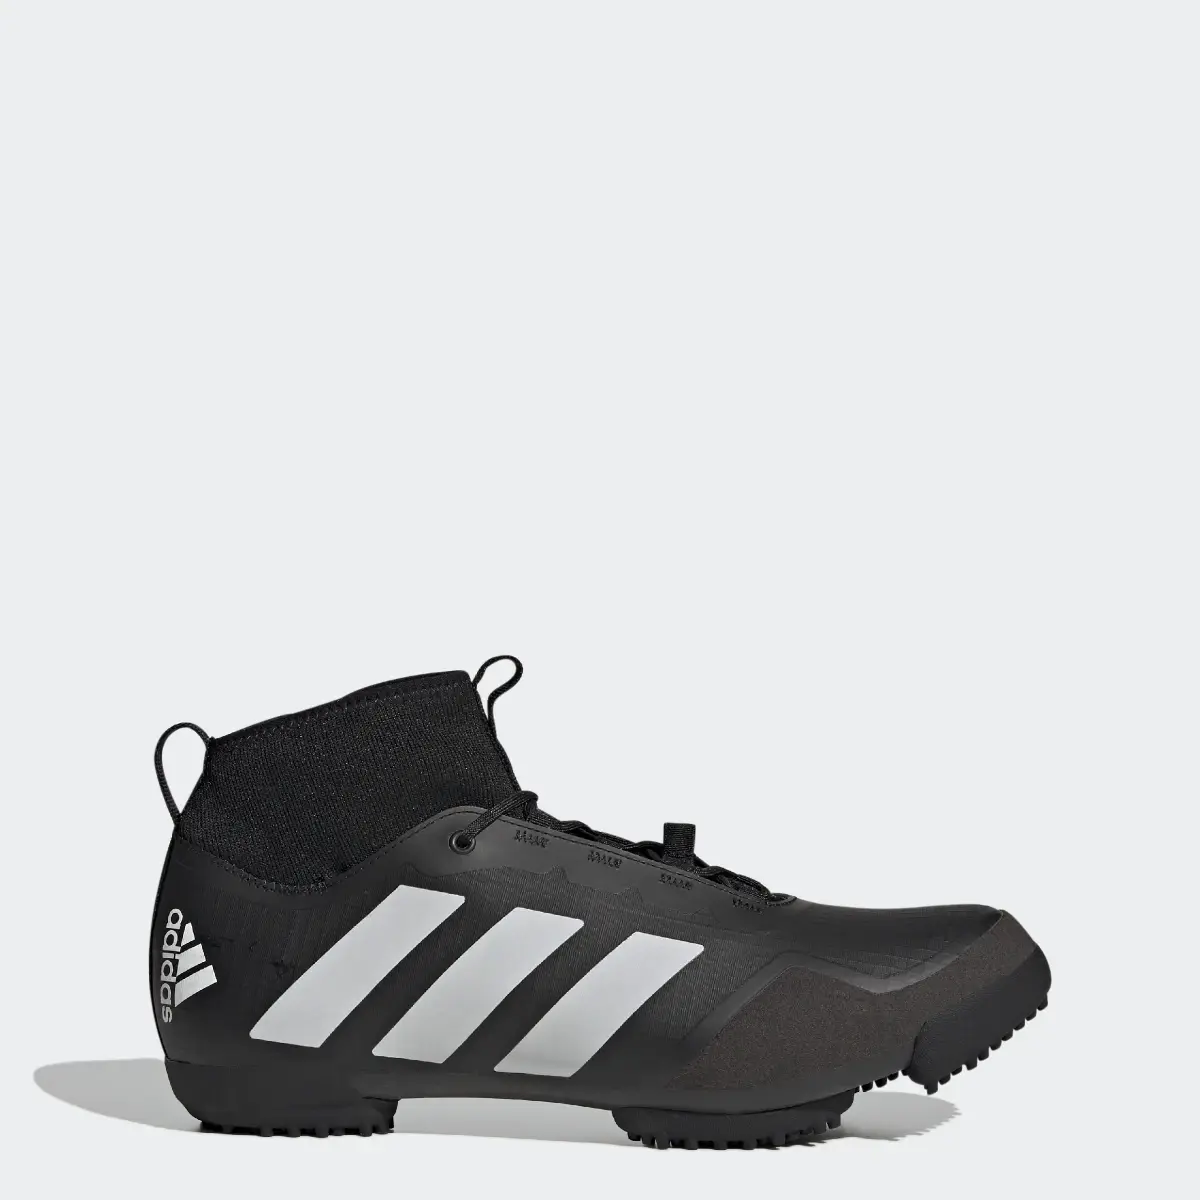 Adidas The Gravel Cycling Shoes. 1